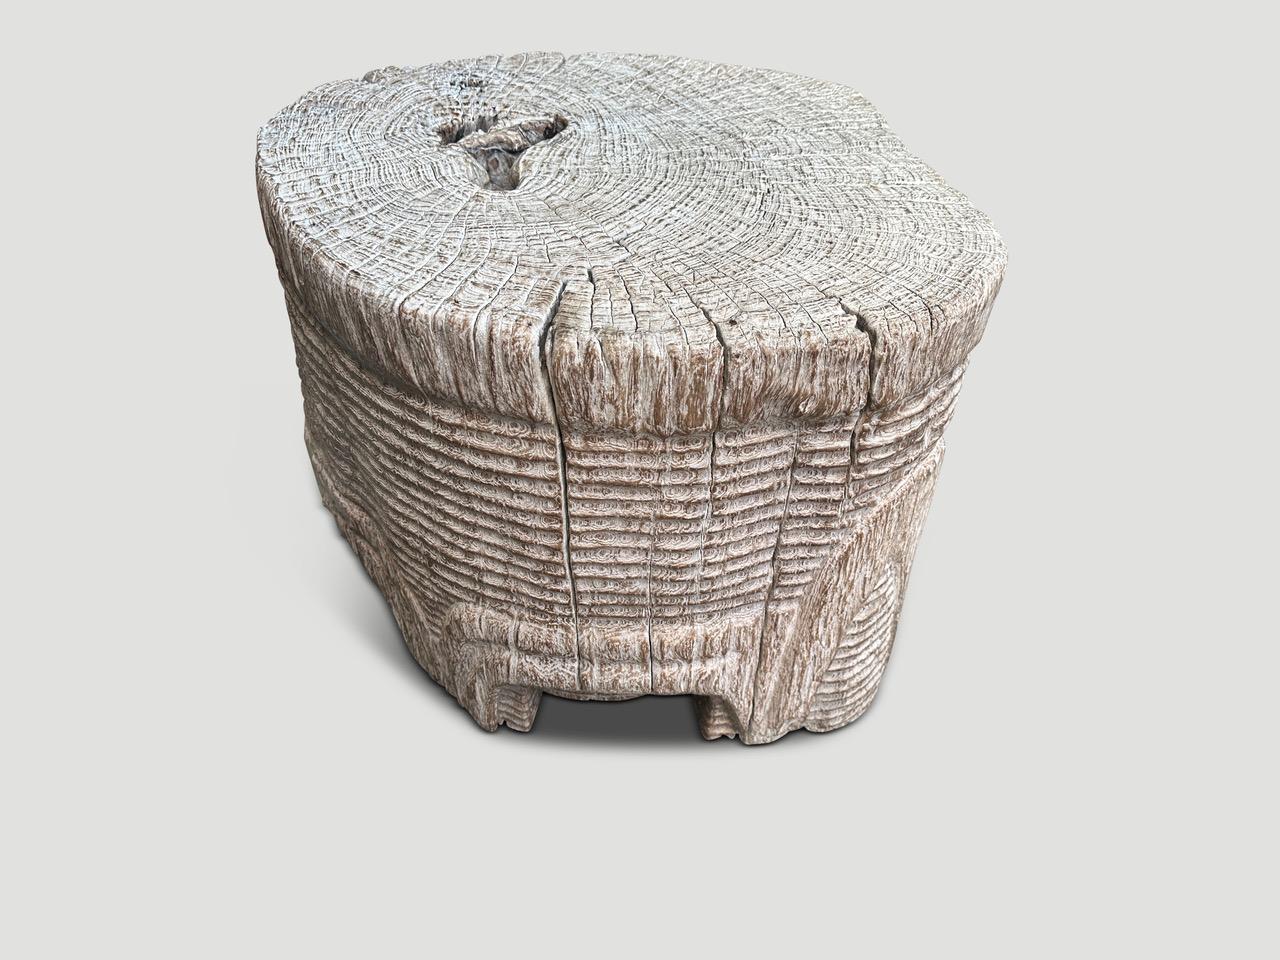 Stunningly beautiful century old teak wood pedestal or over sized side table, featuring our unique minimalist carving. The sides of this ancient teak root are hand carved by our master wood carver. We added a light translucent stain revealing the